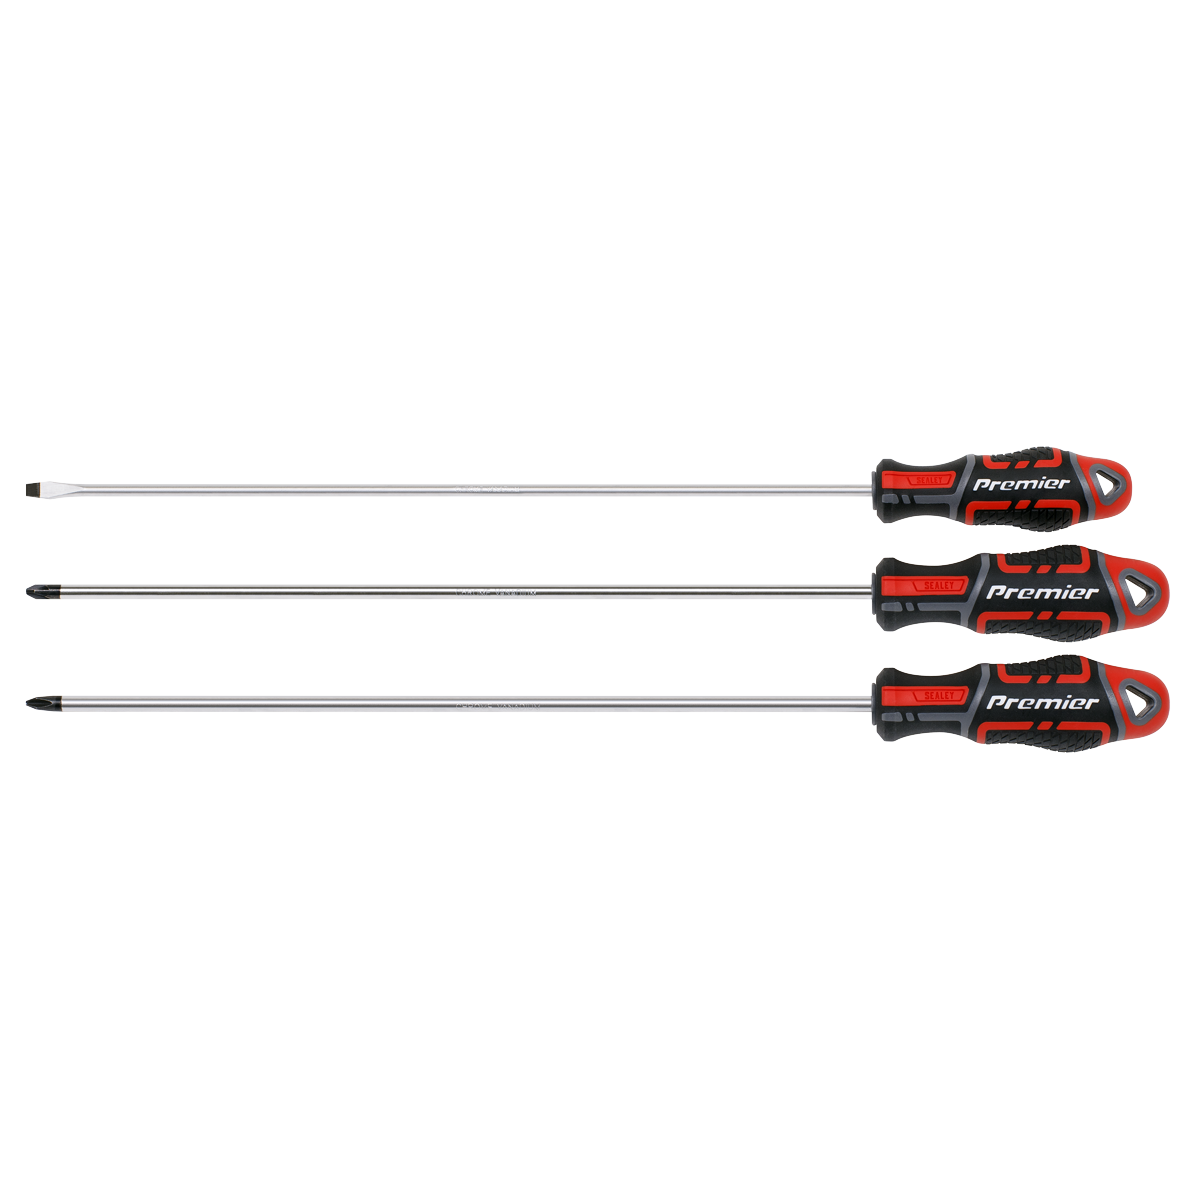 EXTRA-LONG HANDLE screwdrivers – 300mm long, ideal for space limited applications.